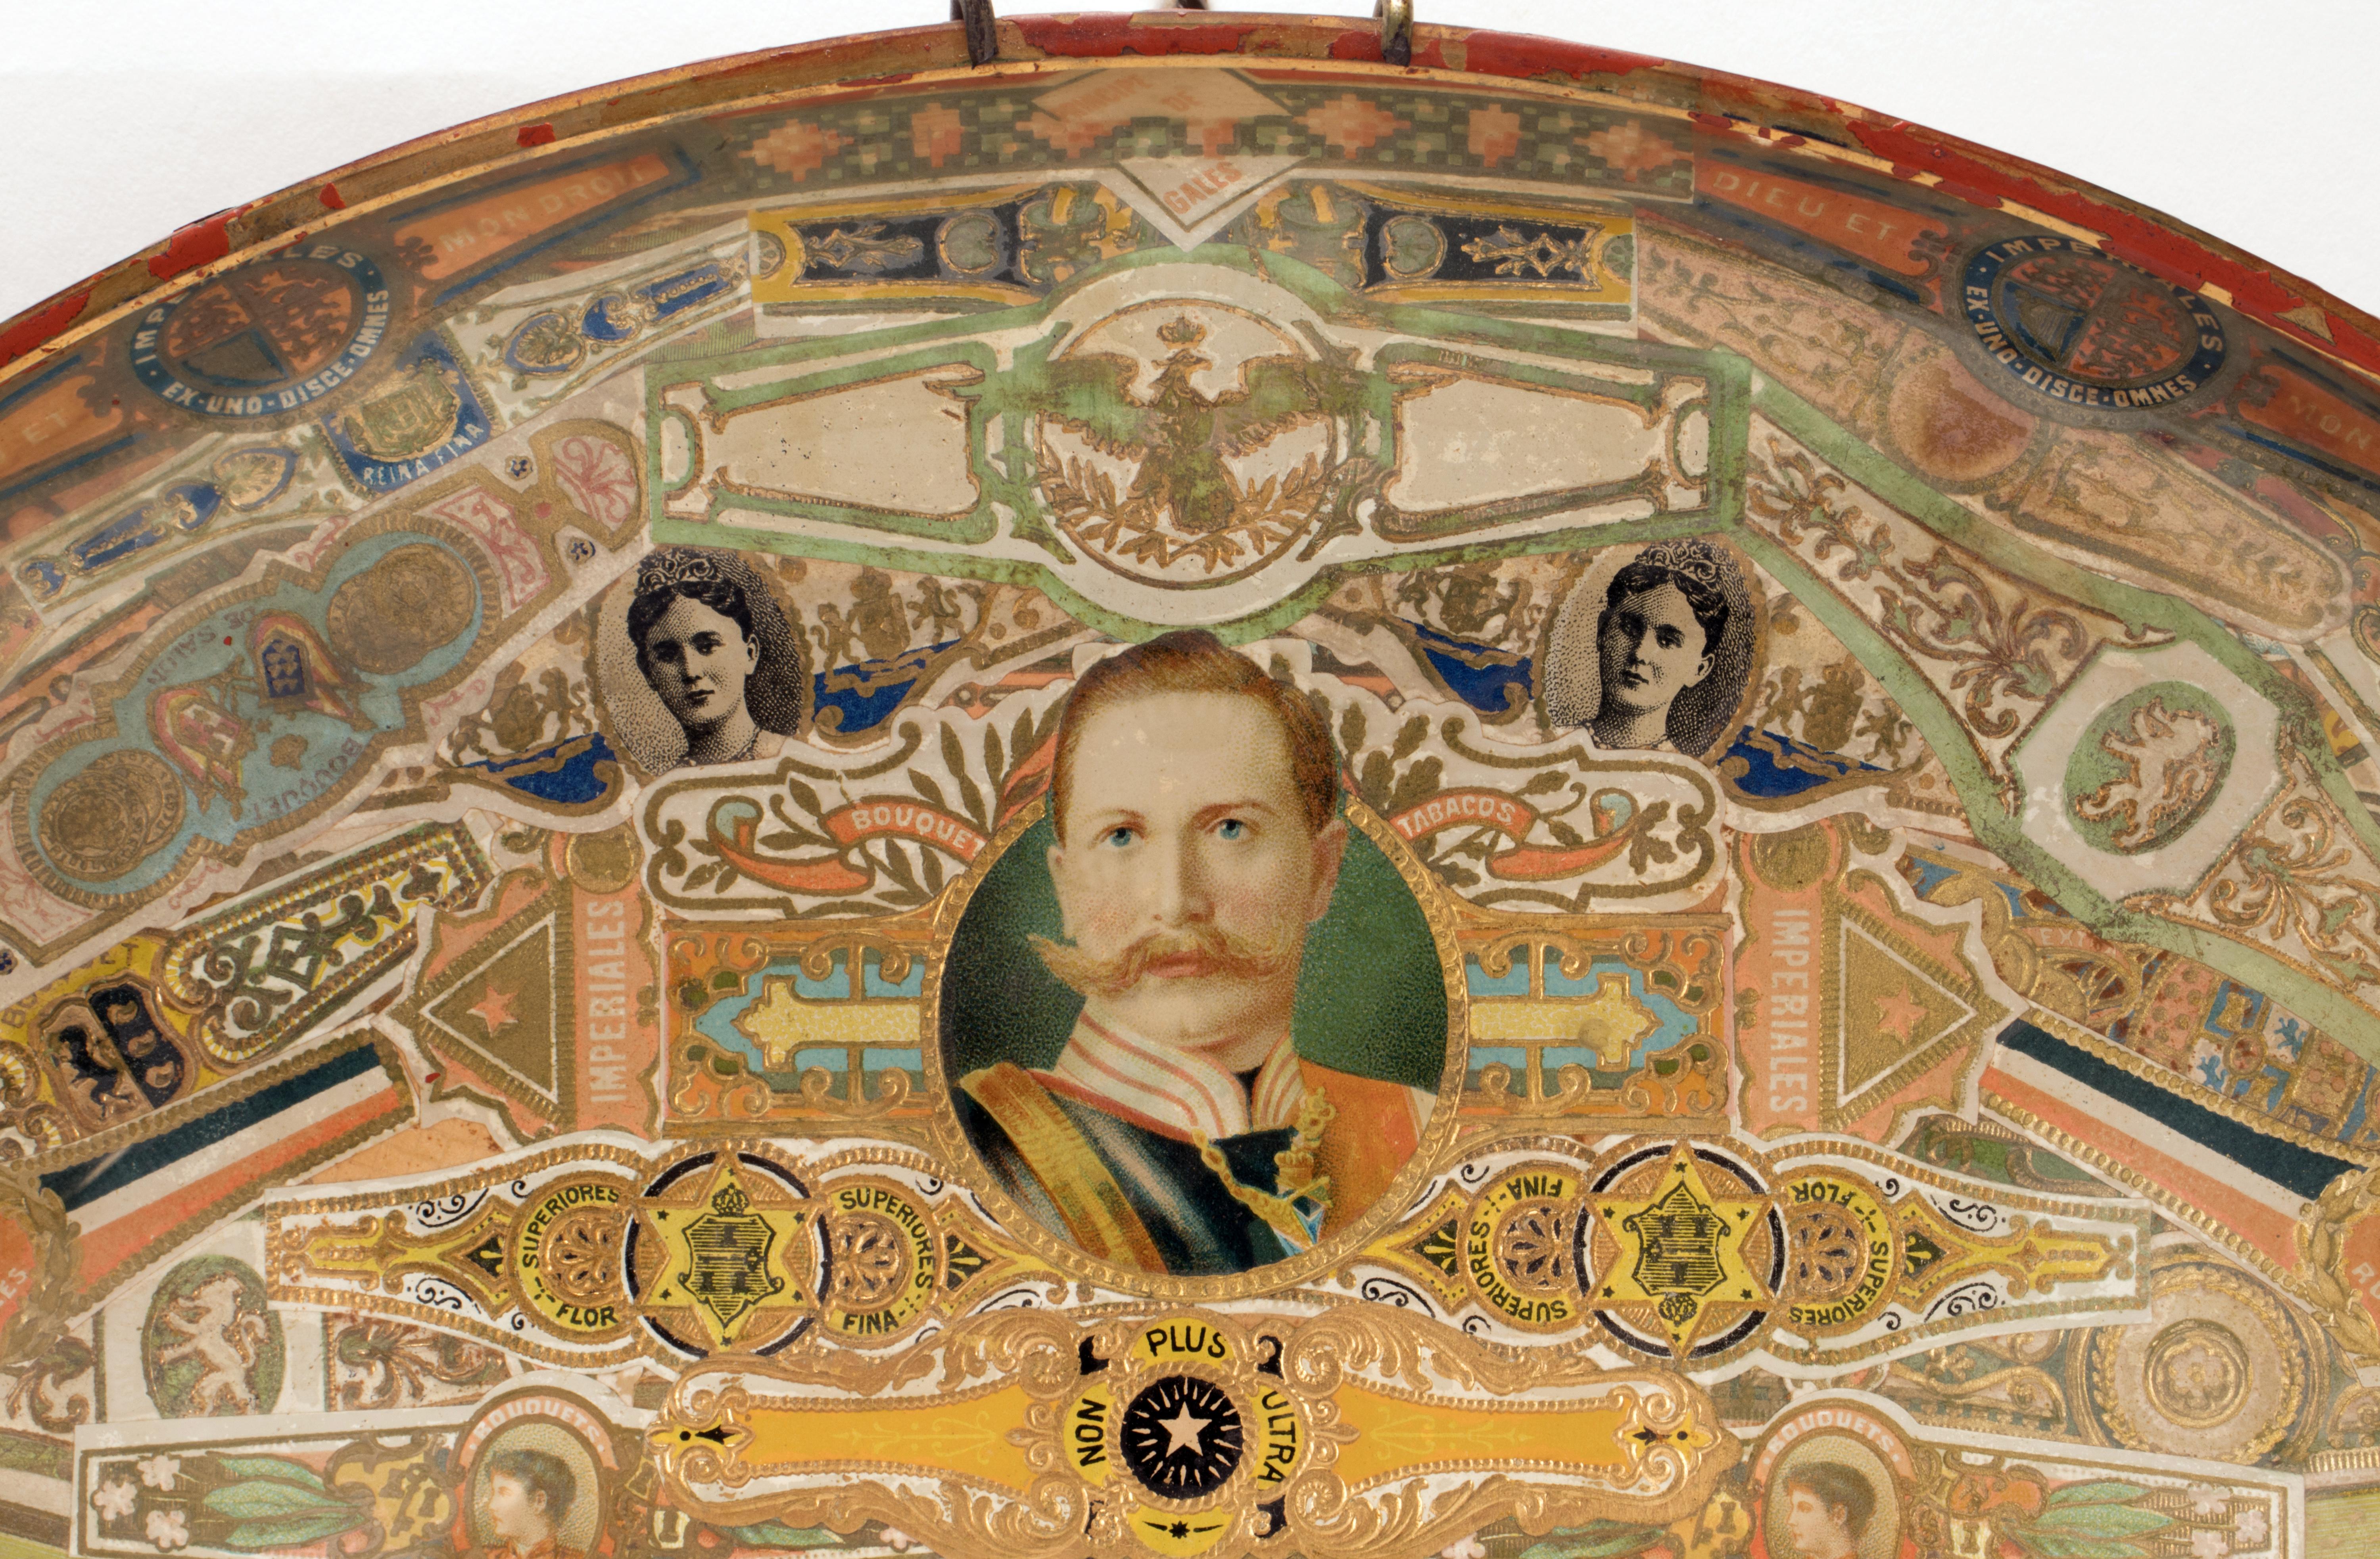 Round shaped glass dish, decorated, with Cuban cigar labels, applied under the glass. Art & Craft period, London circa 1890.